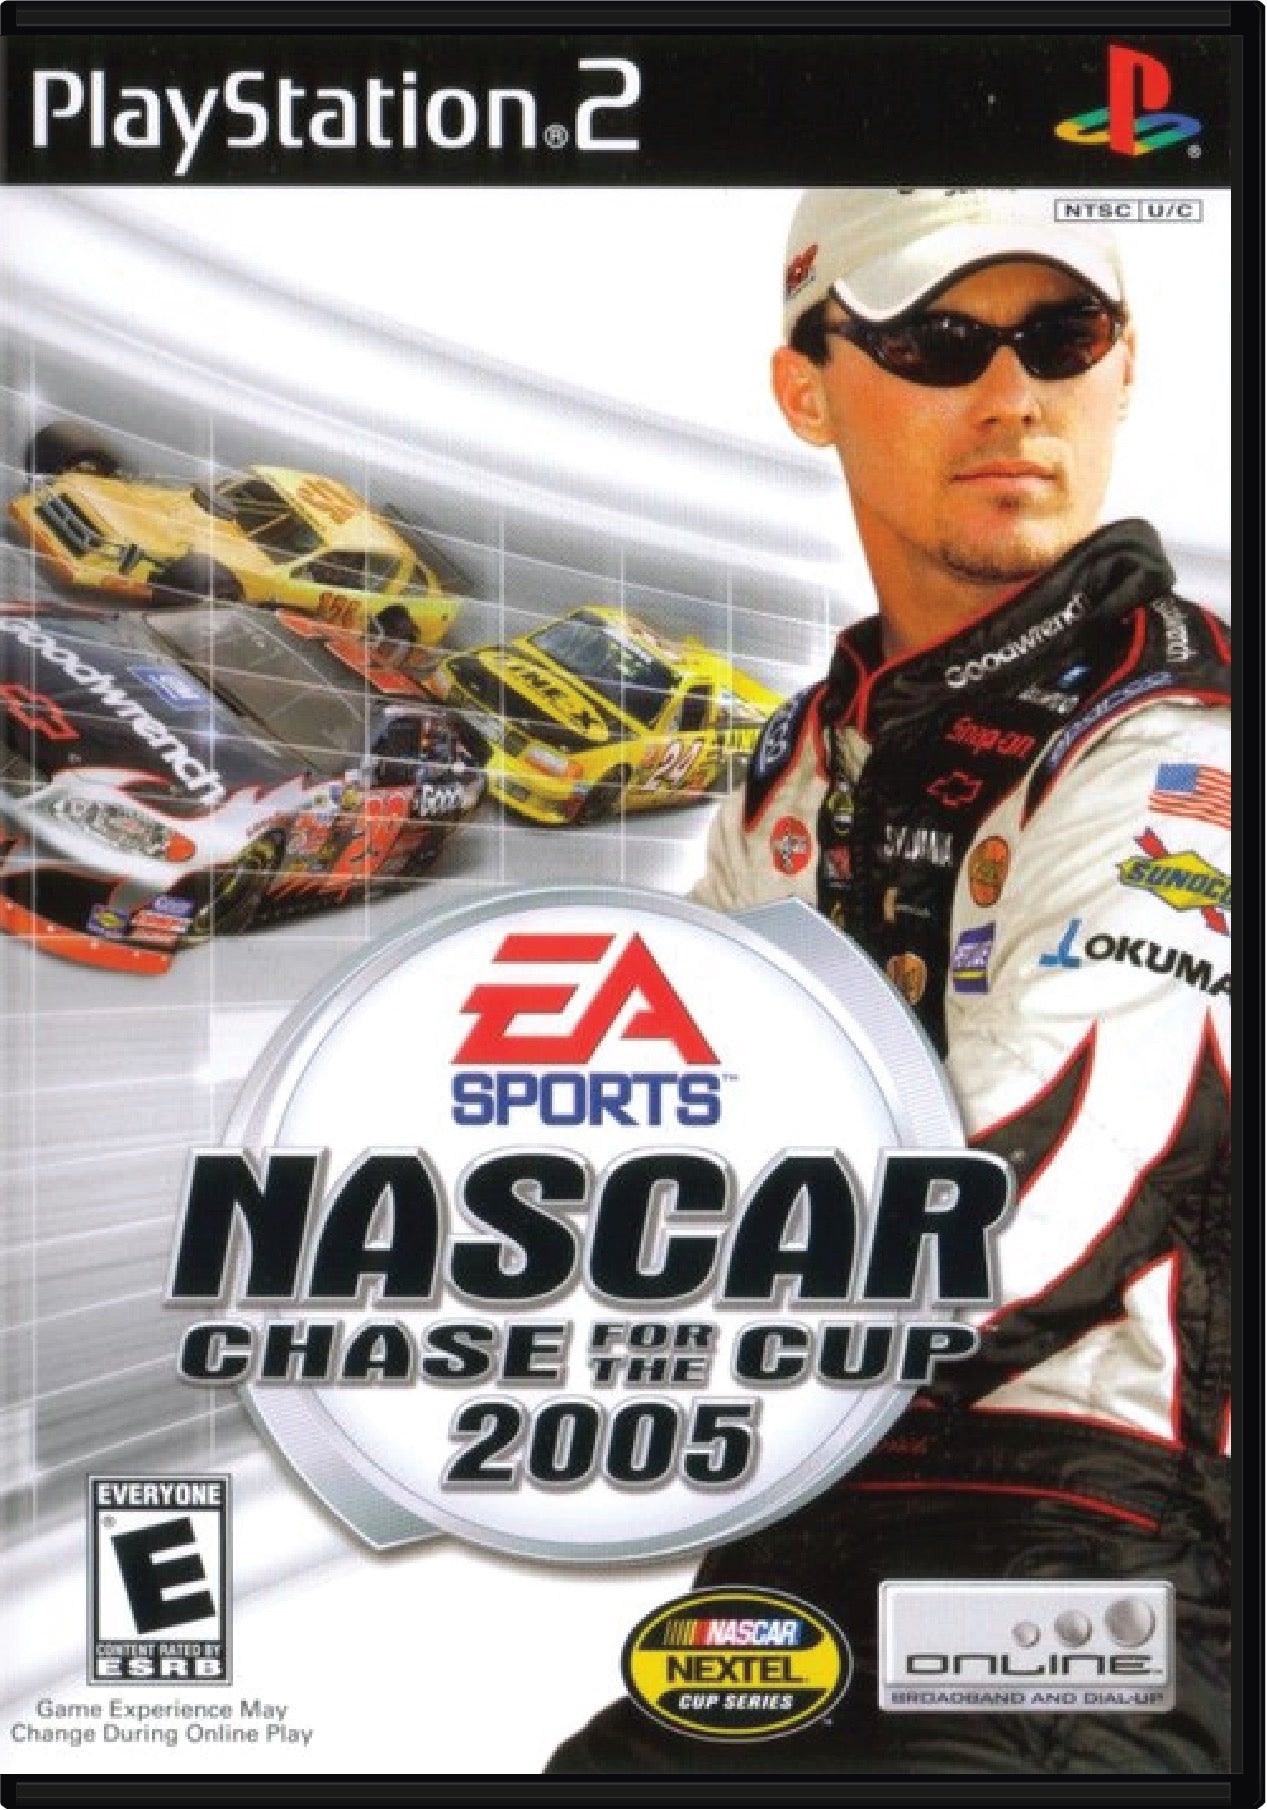 NASCAR Chase for the Cup 2005 Cover Art and Product Photo